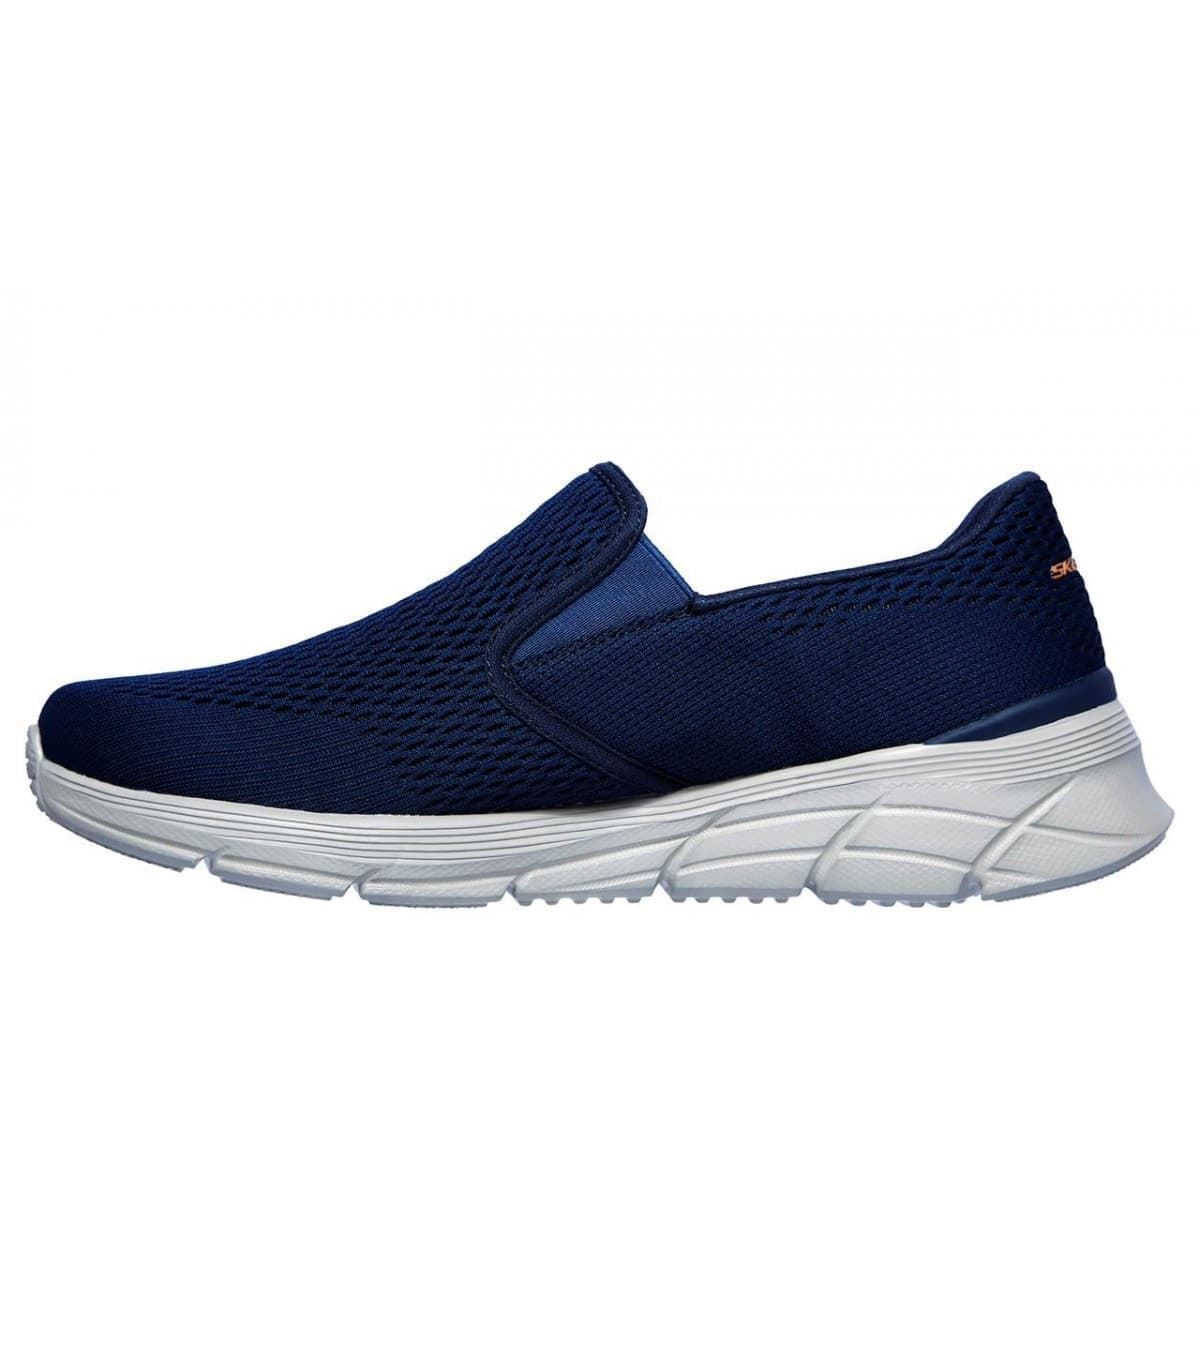 Skechers_ Deportivo relaxed fit: Equalizer 4.0 azul - Imagen 3